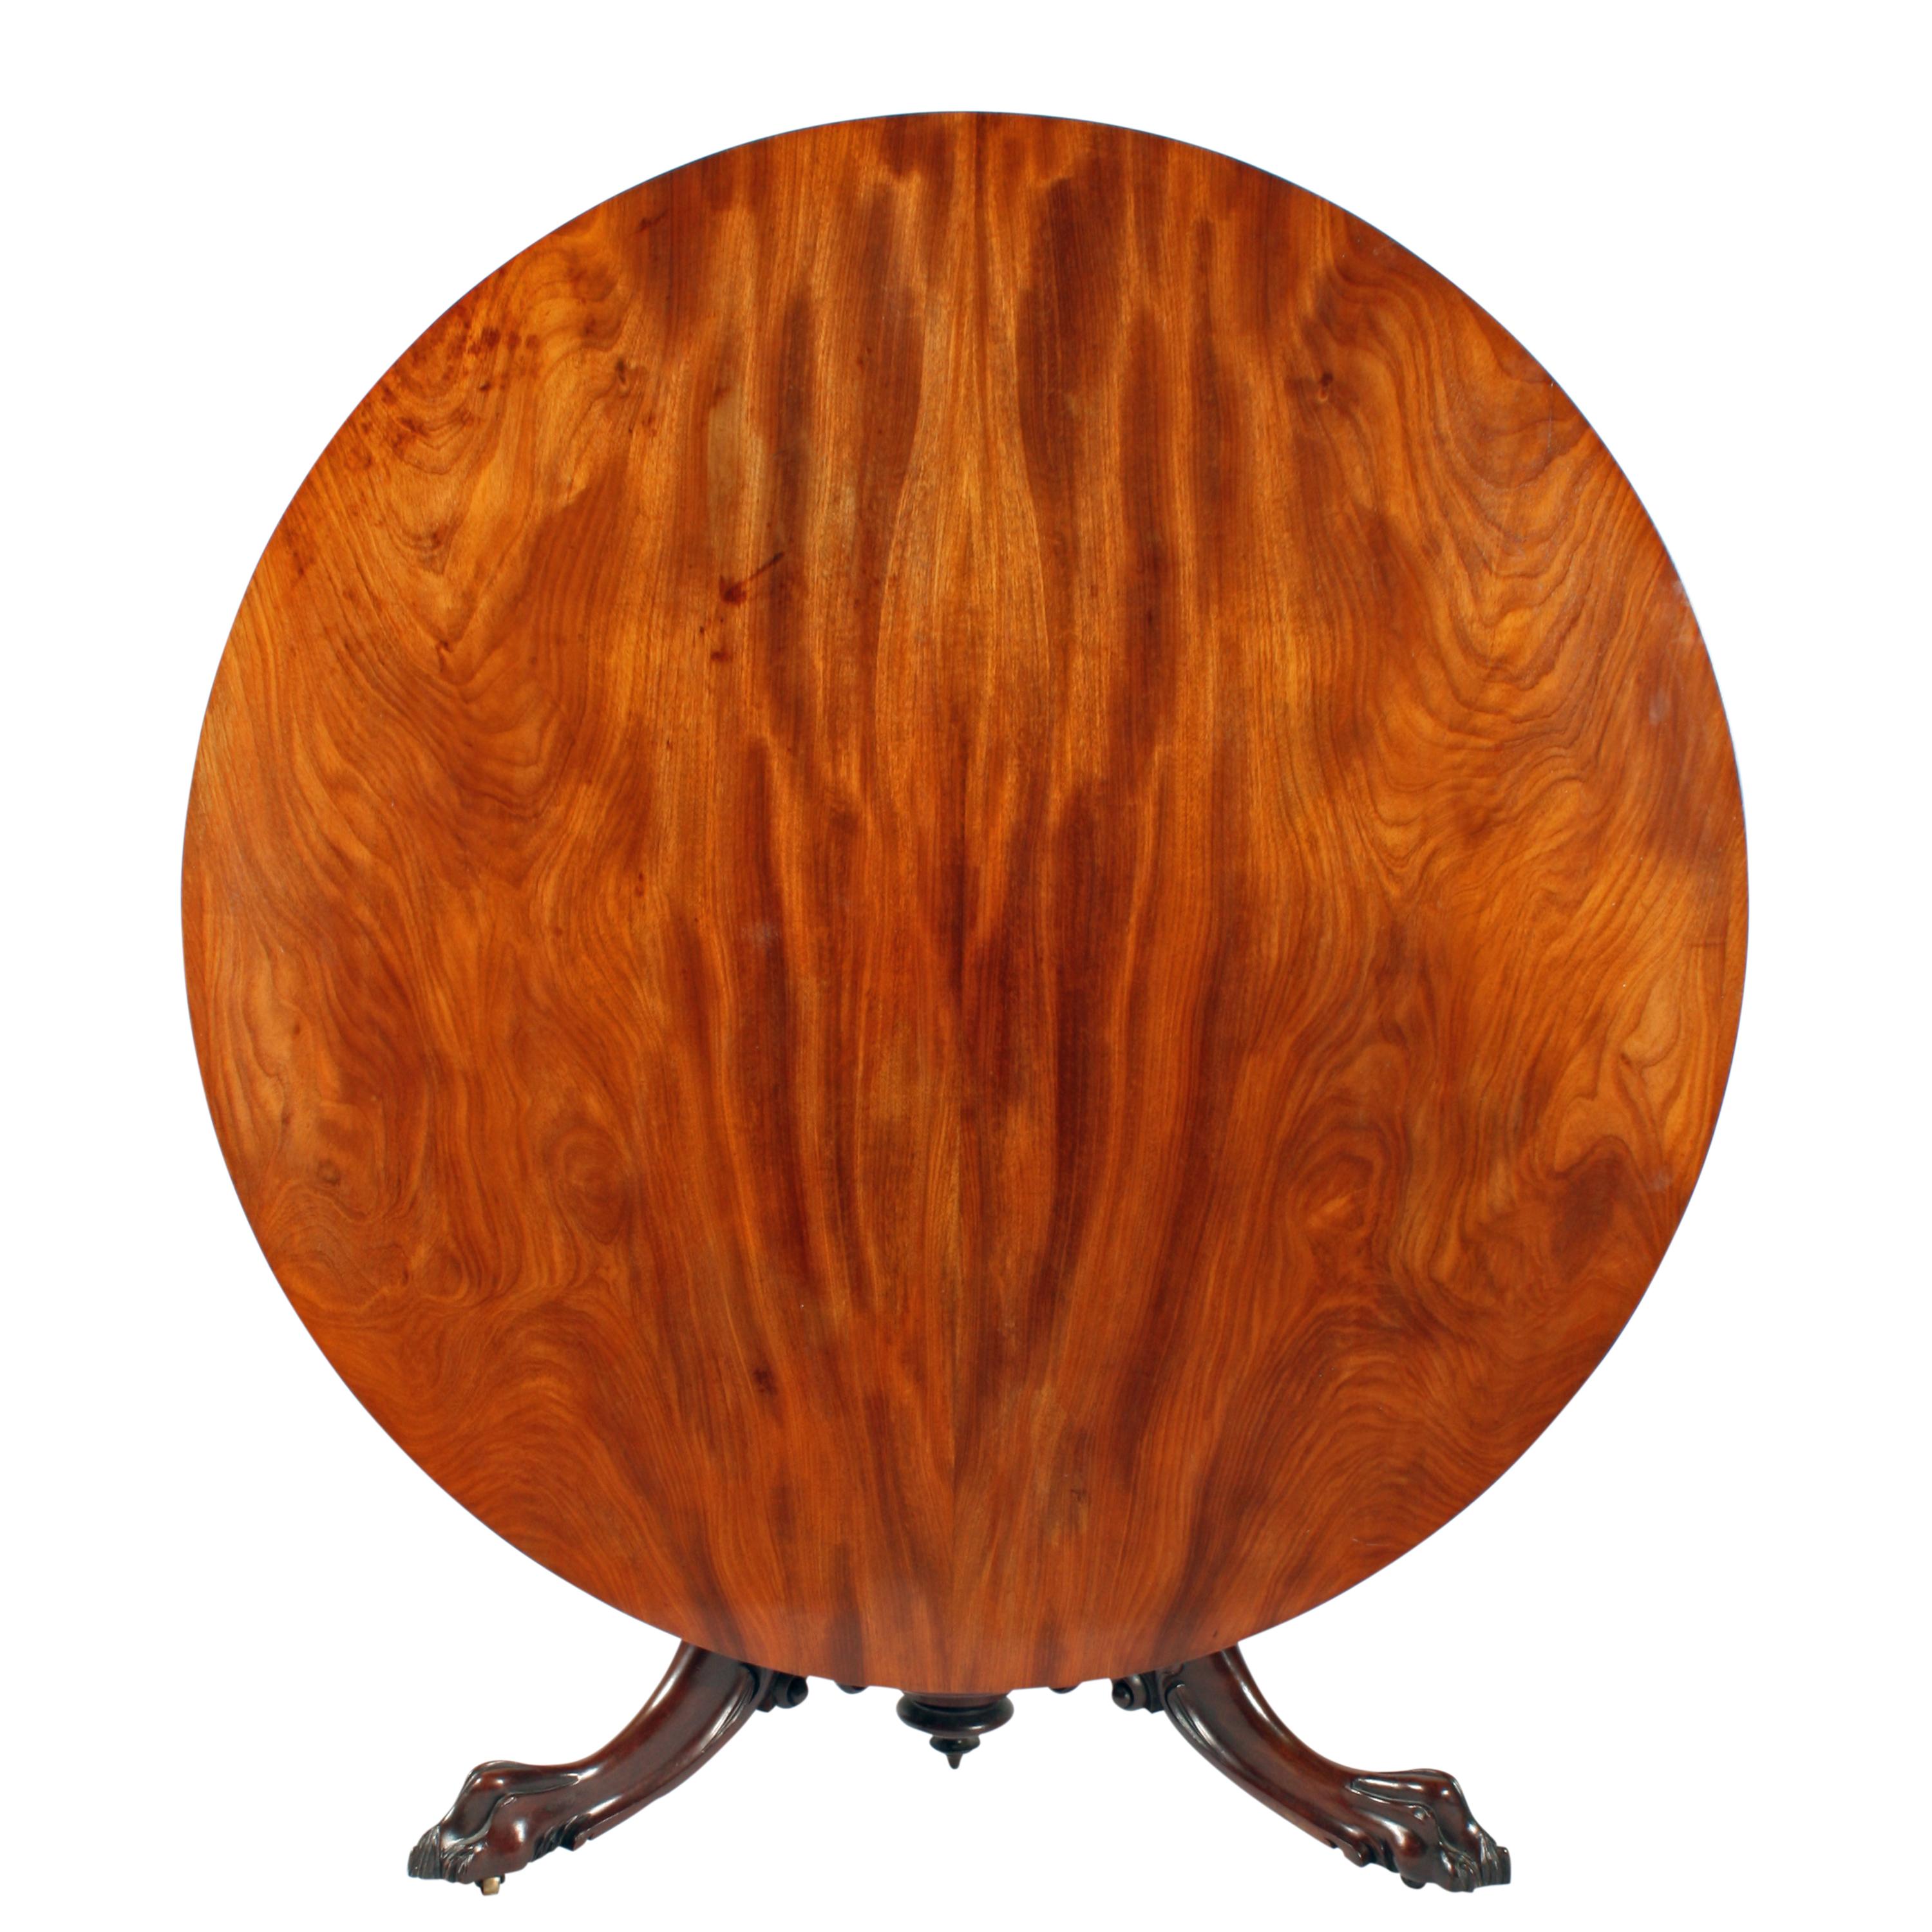 A middle of the 19th century Victorian breakfast or centre table.

The table has a circular figured mahogany veneered top with a square edge sitting on a tripod base.

The base has three cabriole legs with carved claw feet, carved scroll